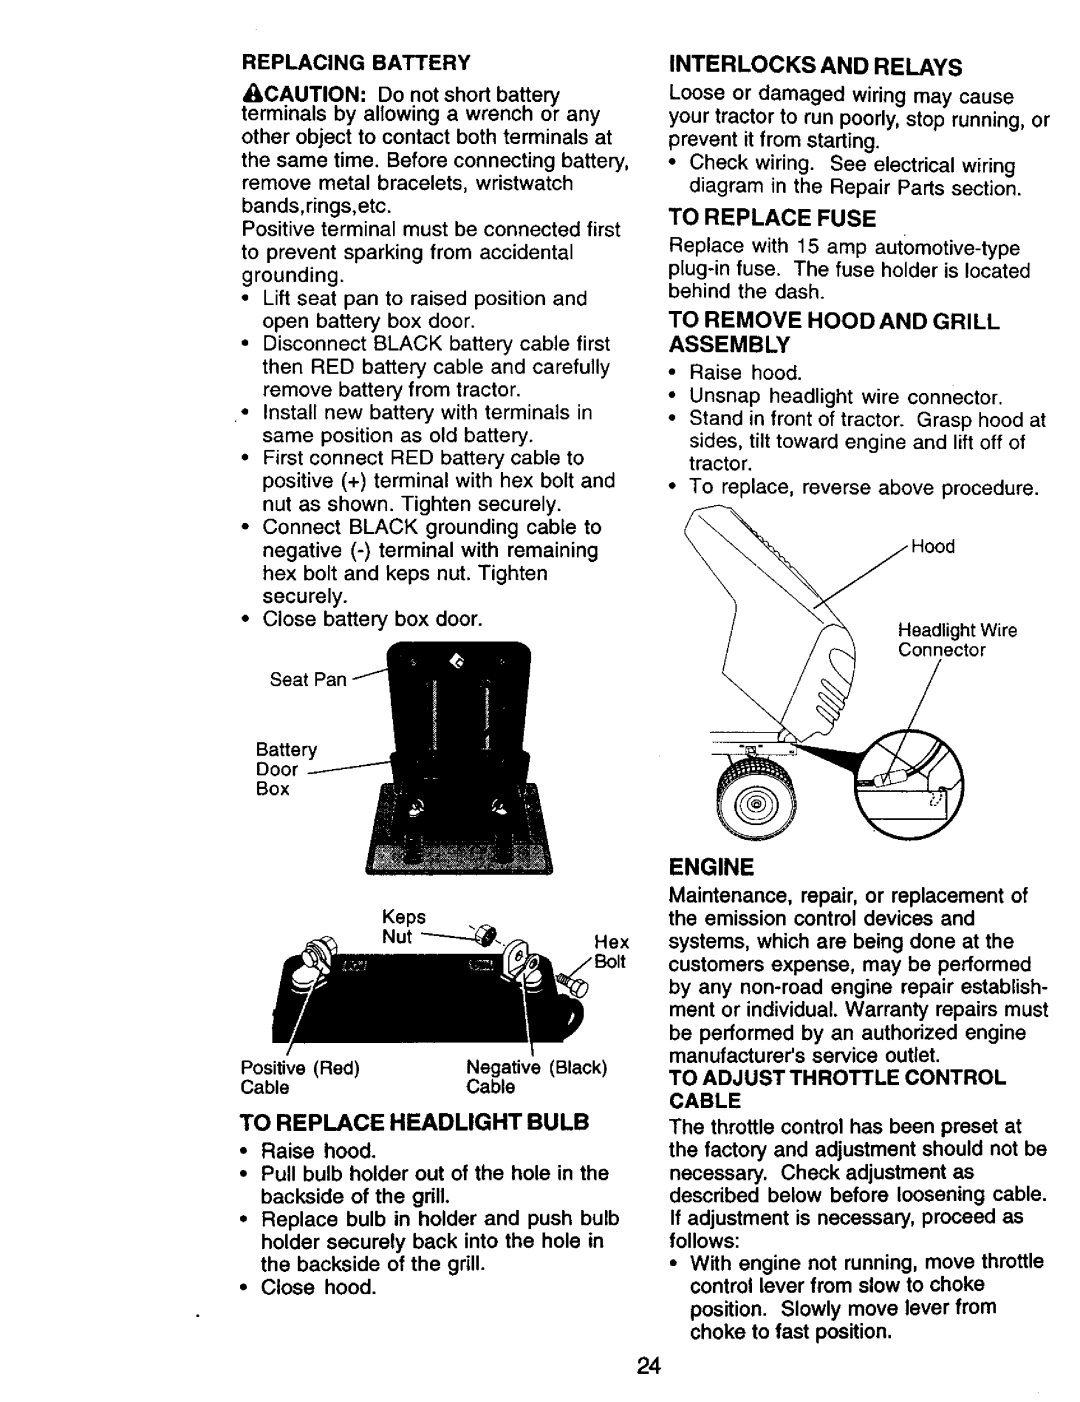 Craftsman 917.270732 owner manual To Replace Headlight Bulb, To Remove Hoodand Grill Assembly, Engine 